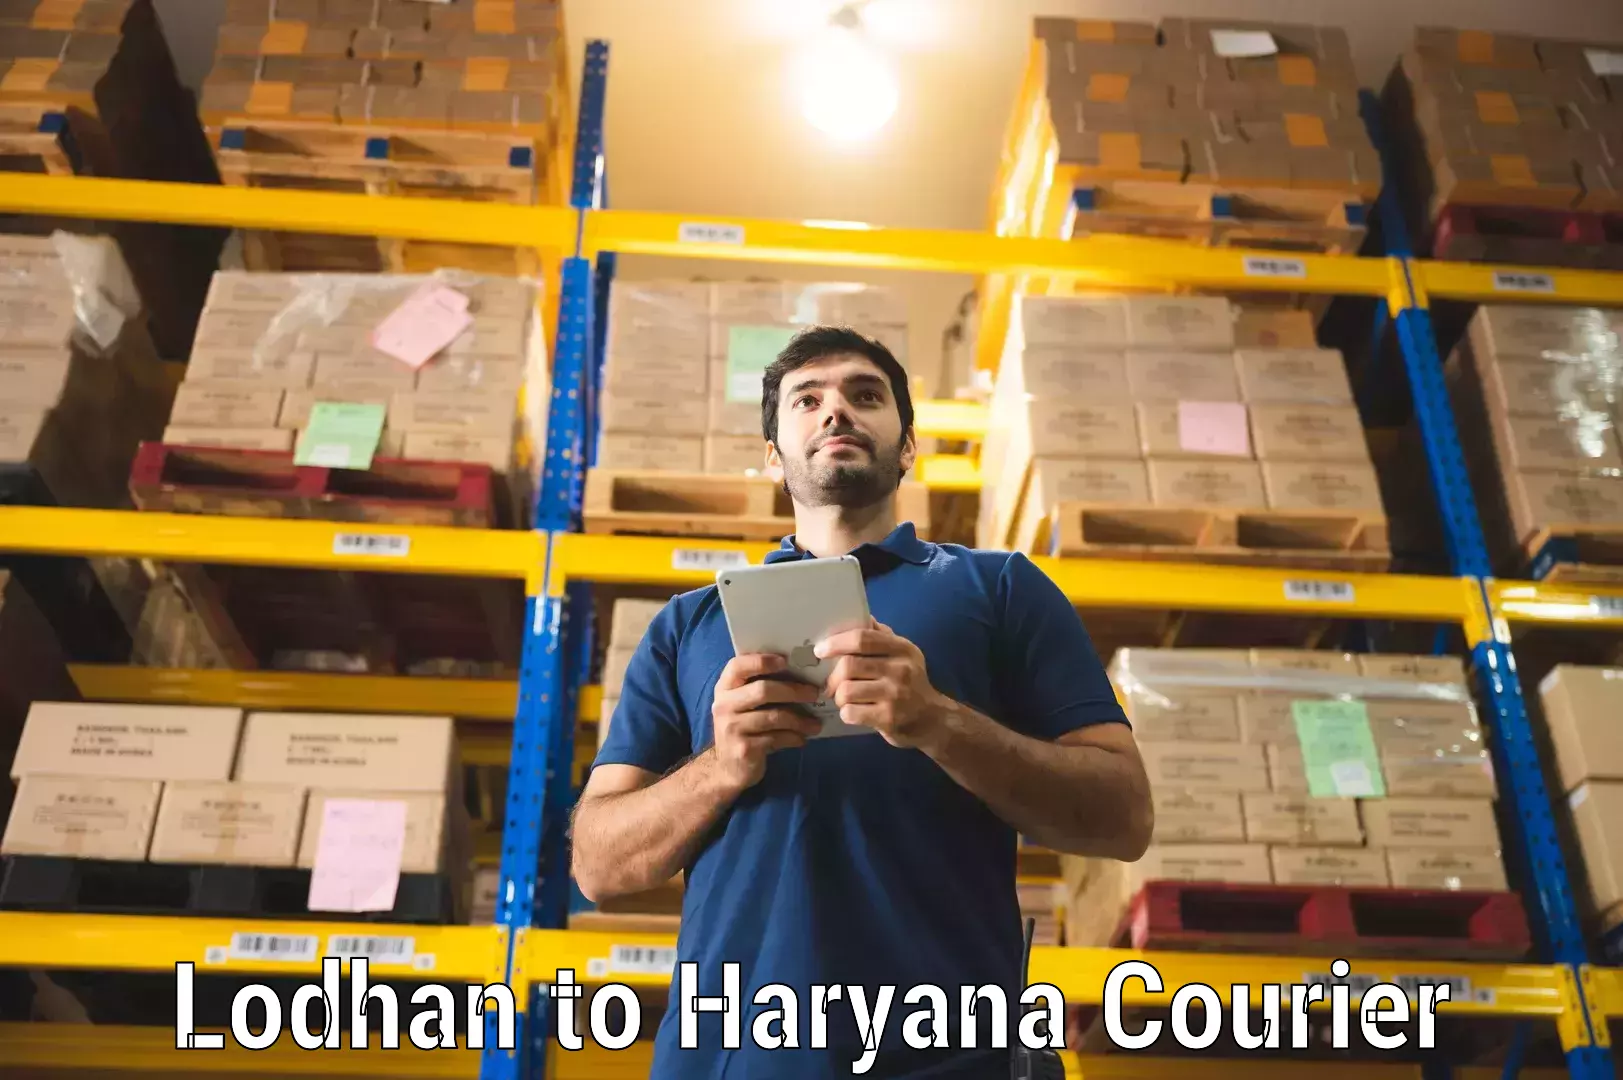 Global courier networks Lodhan to Haryana